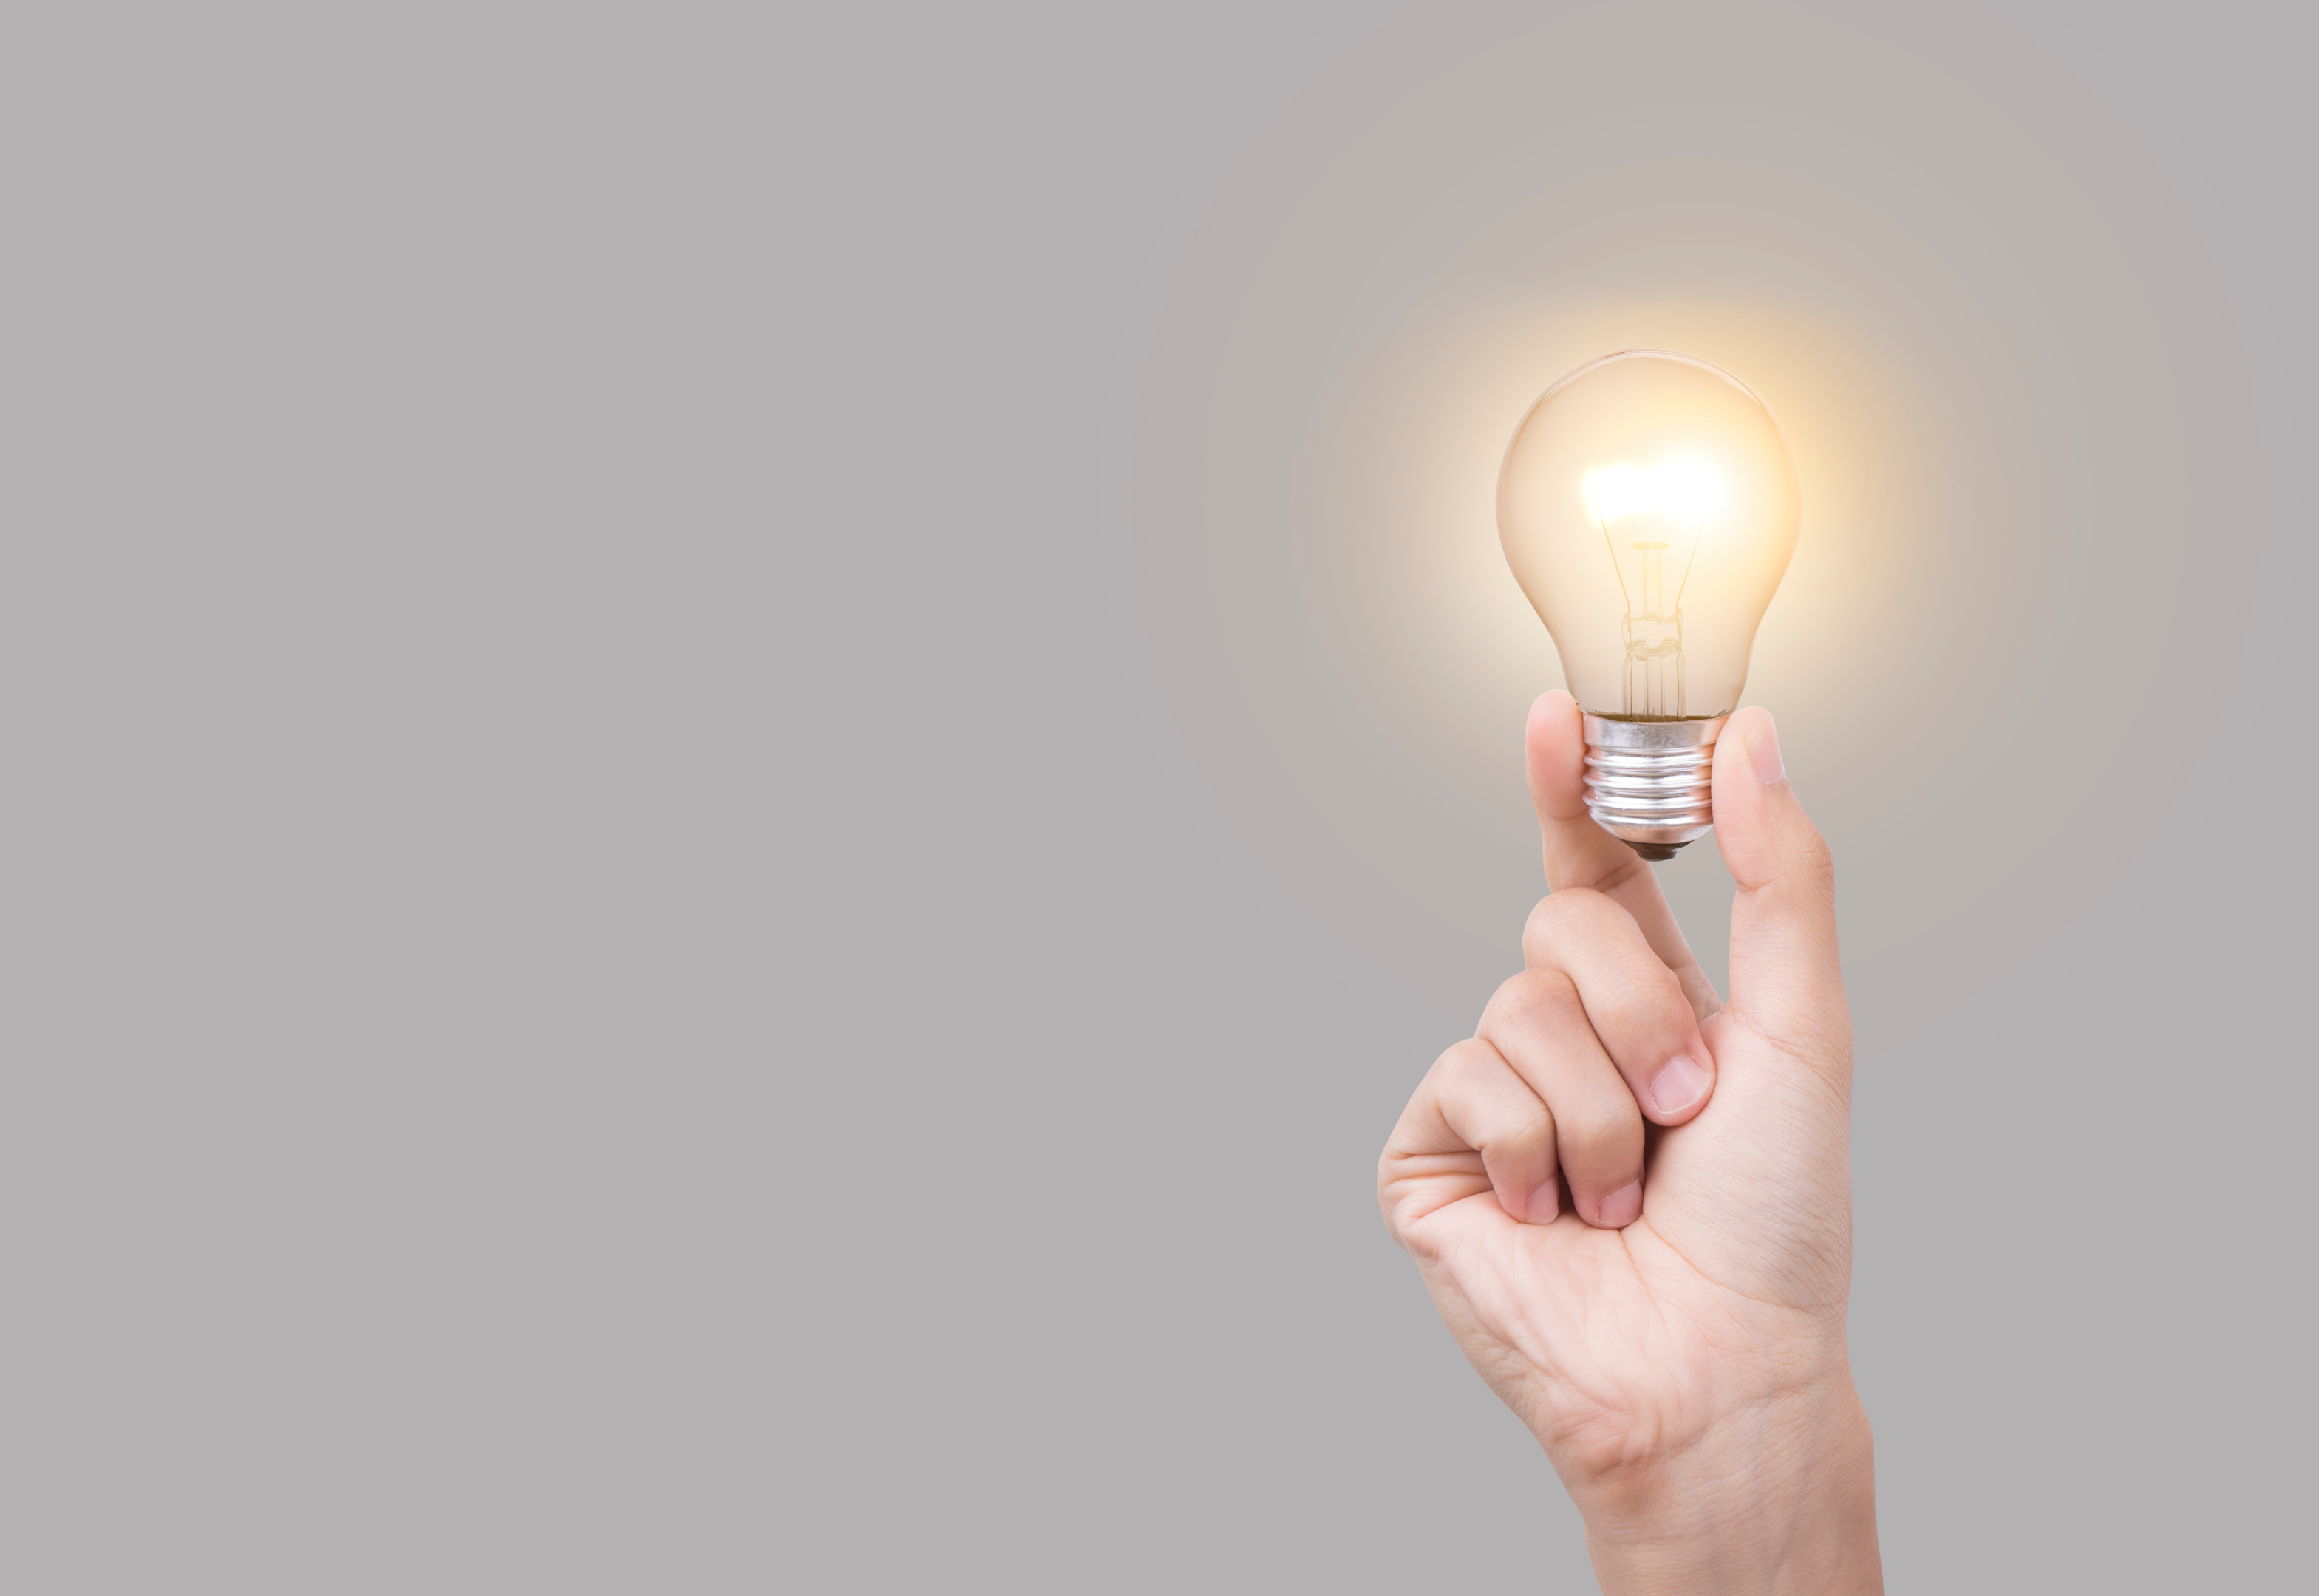 An image depicting a person holding a lightbulb, representing the idea of what is an entrepreneur and identifying opportunities.